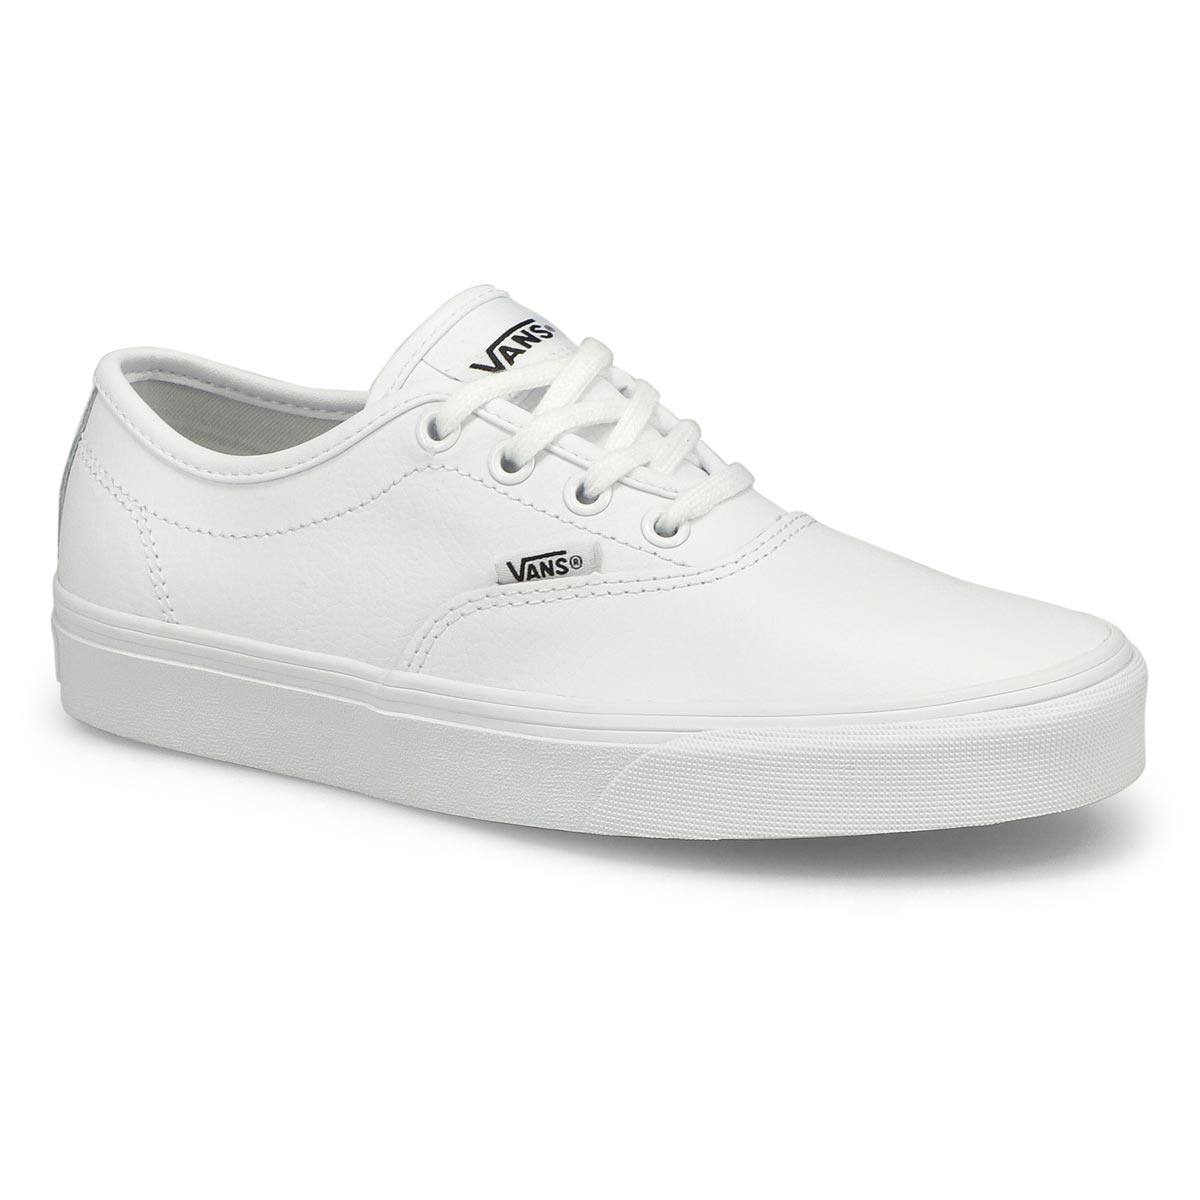 white vans shoes for sale